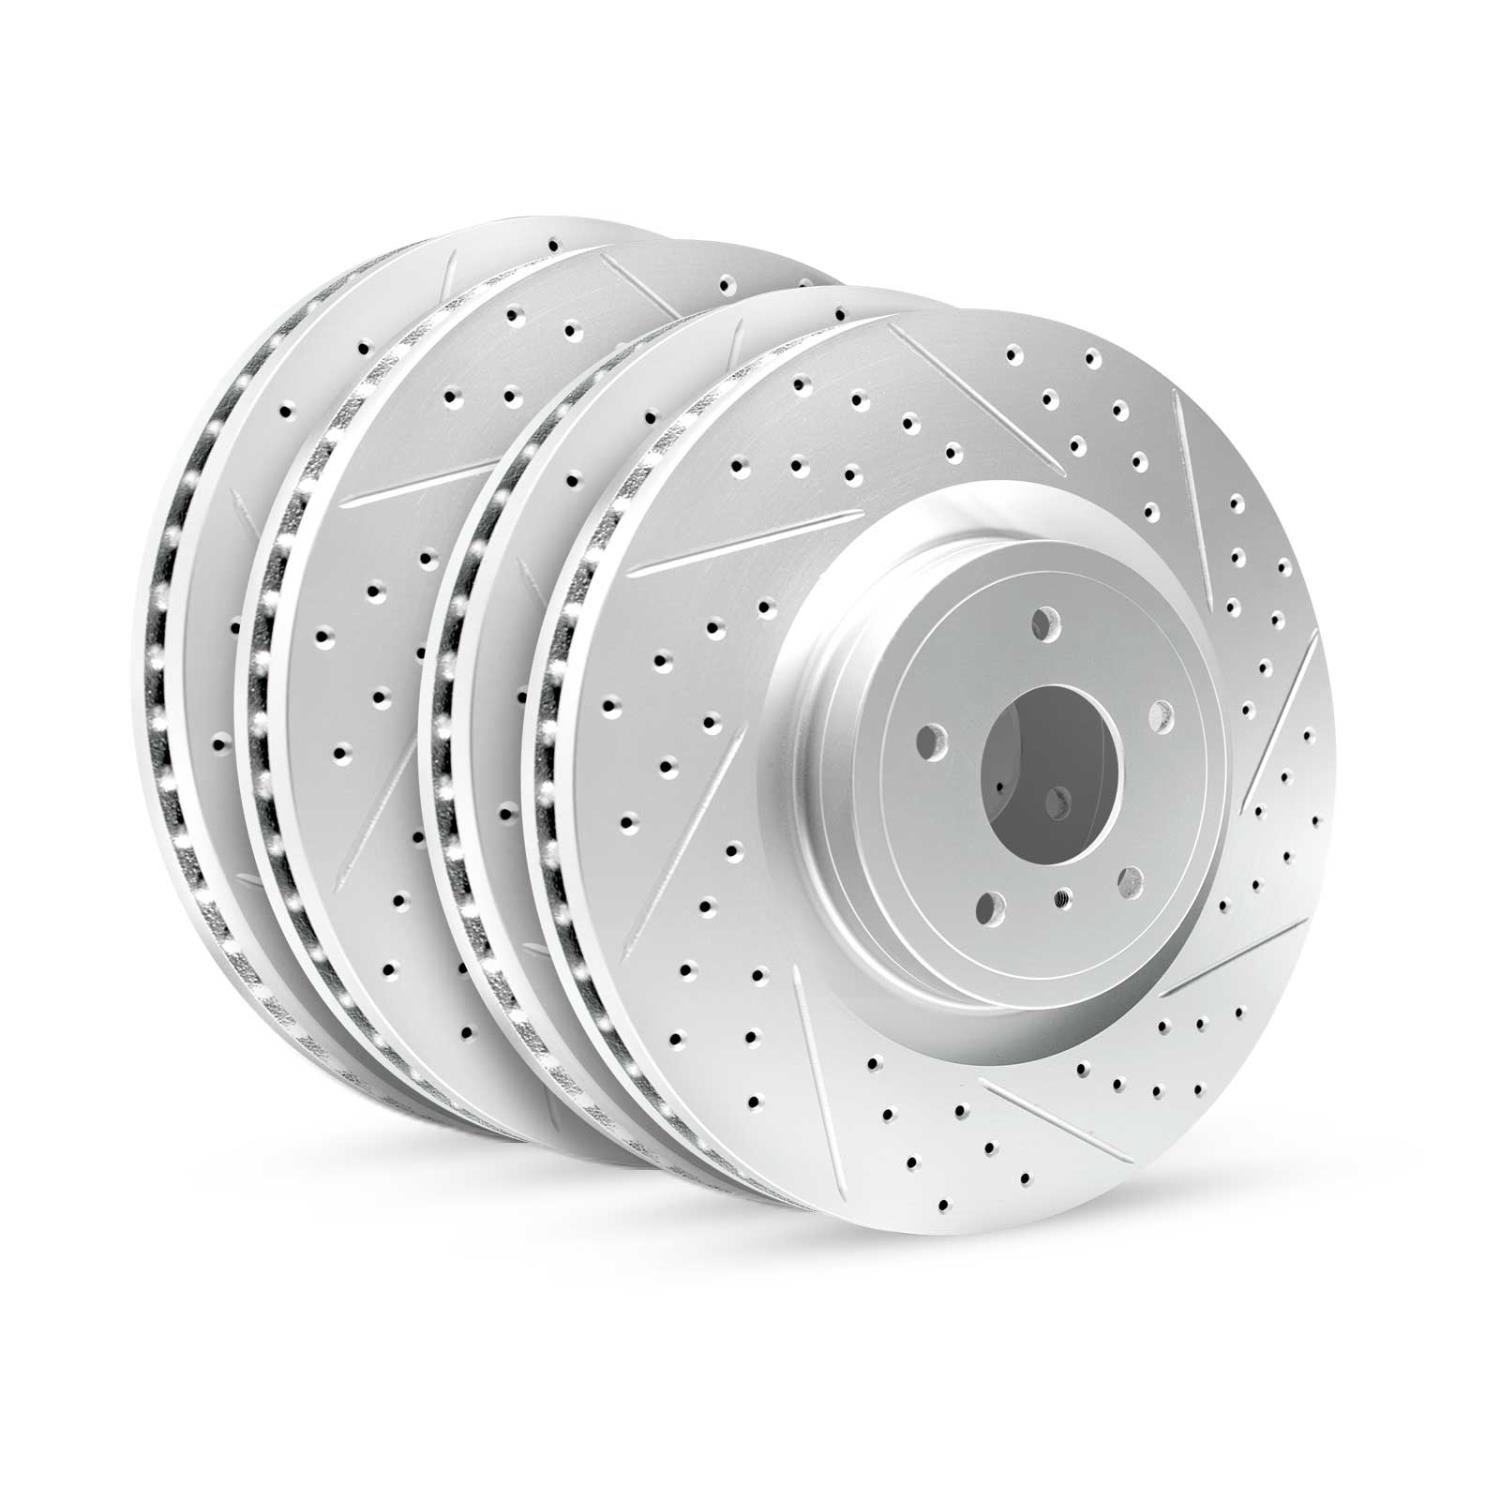 GEO-Carbon Drilled/Slotted Rotors, 2004-2006 Kia/Hyundai/Genesis, Position: Front/Rear